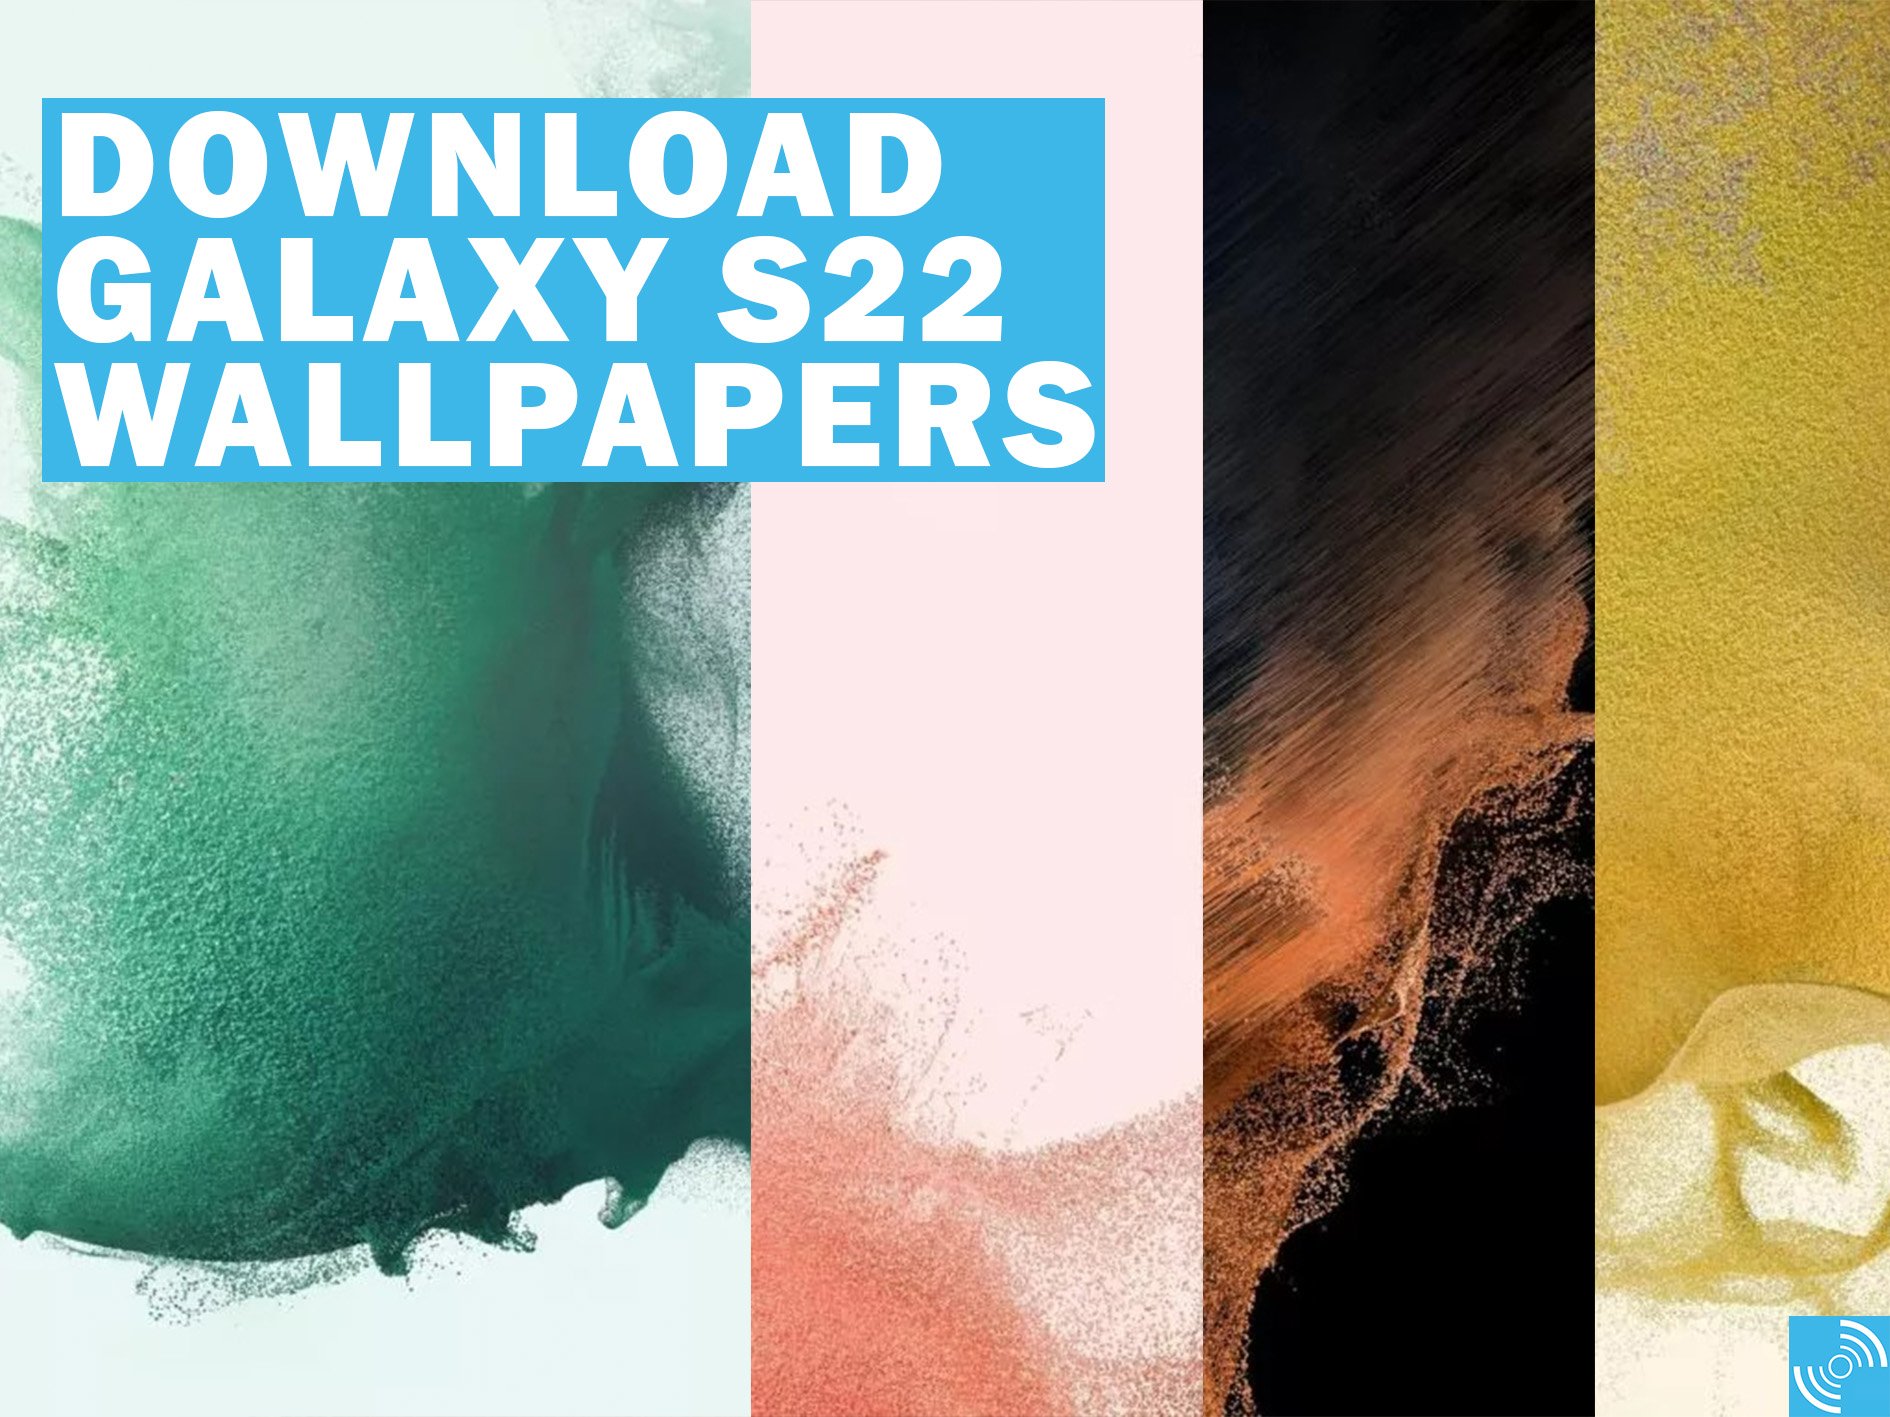 Download Samsung Galaxy S22 Wallpapers in HD Quality [Leaked] - Gizmochina